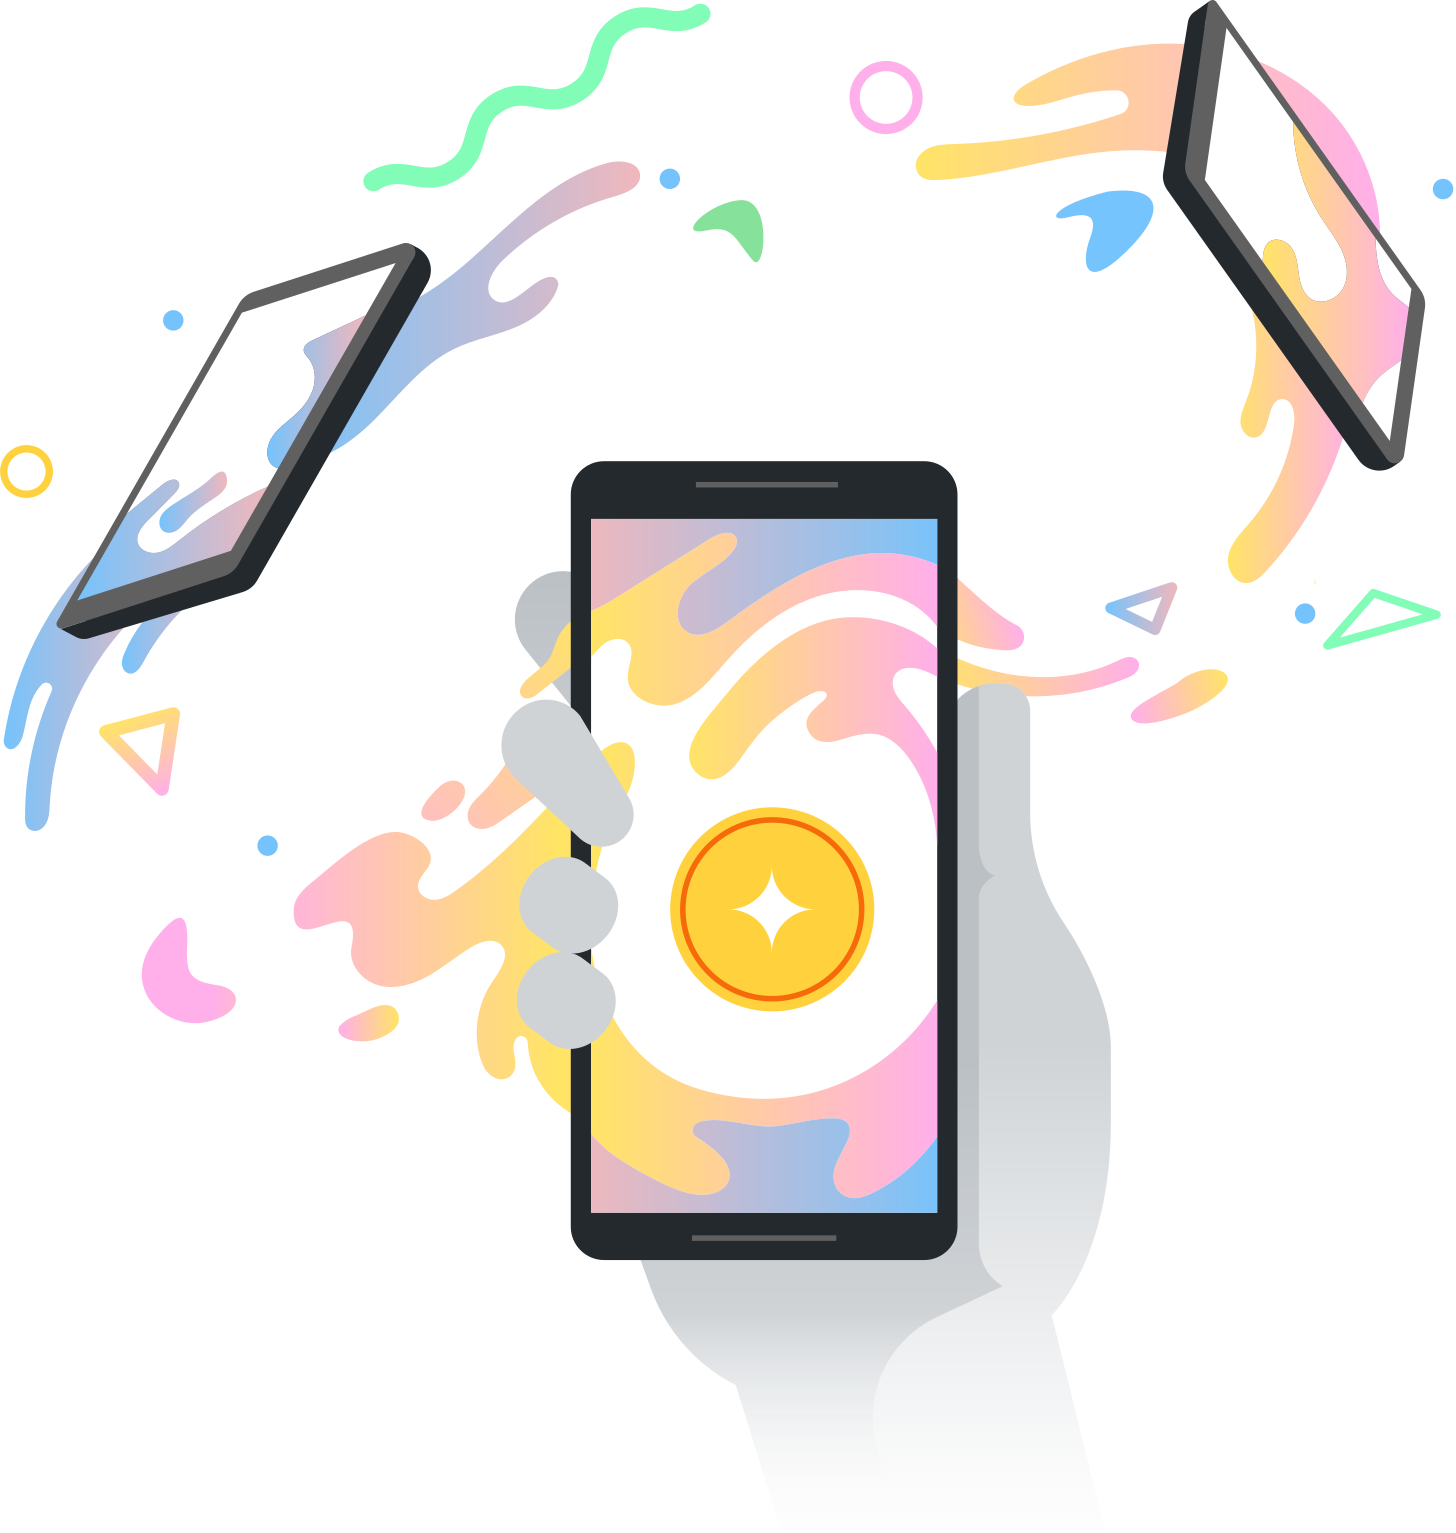 Illustration of a hand holding a mobile device with other mobile devices swirling around it.